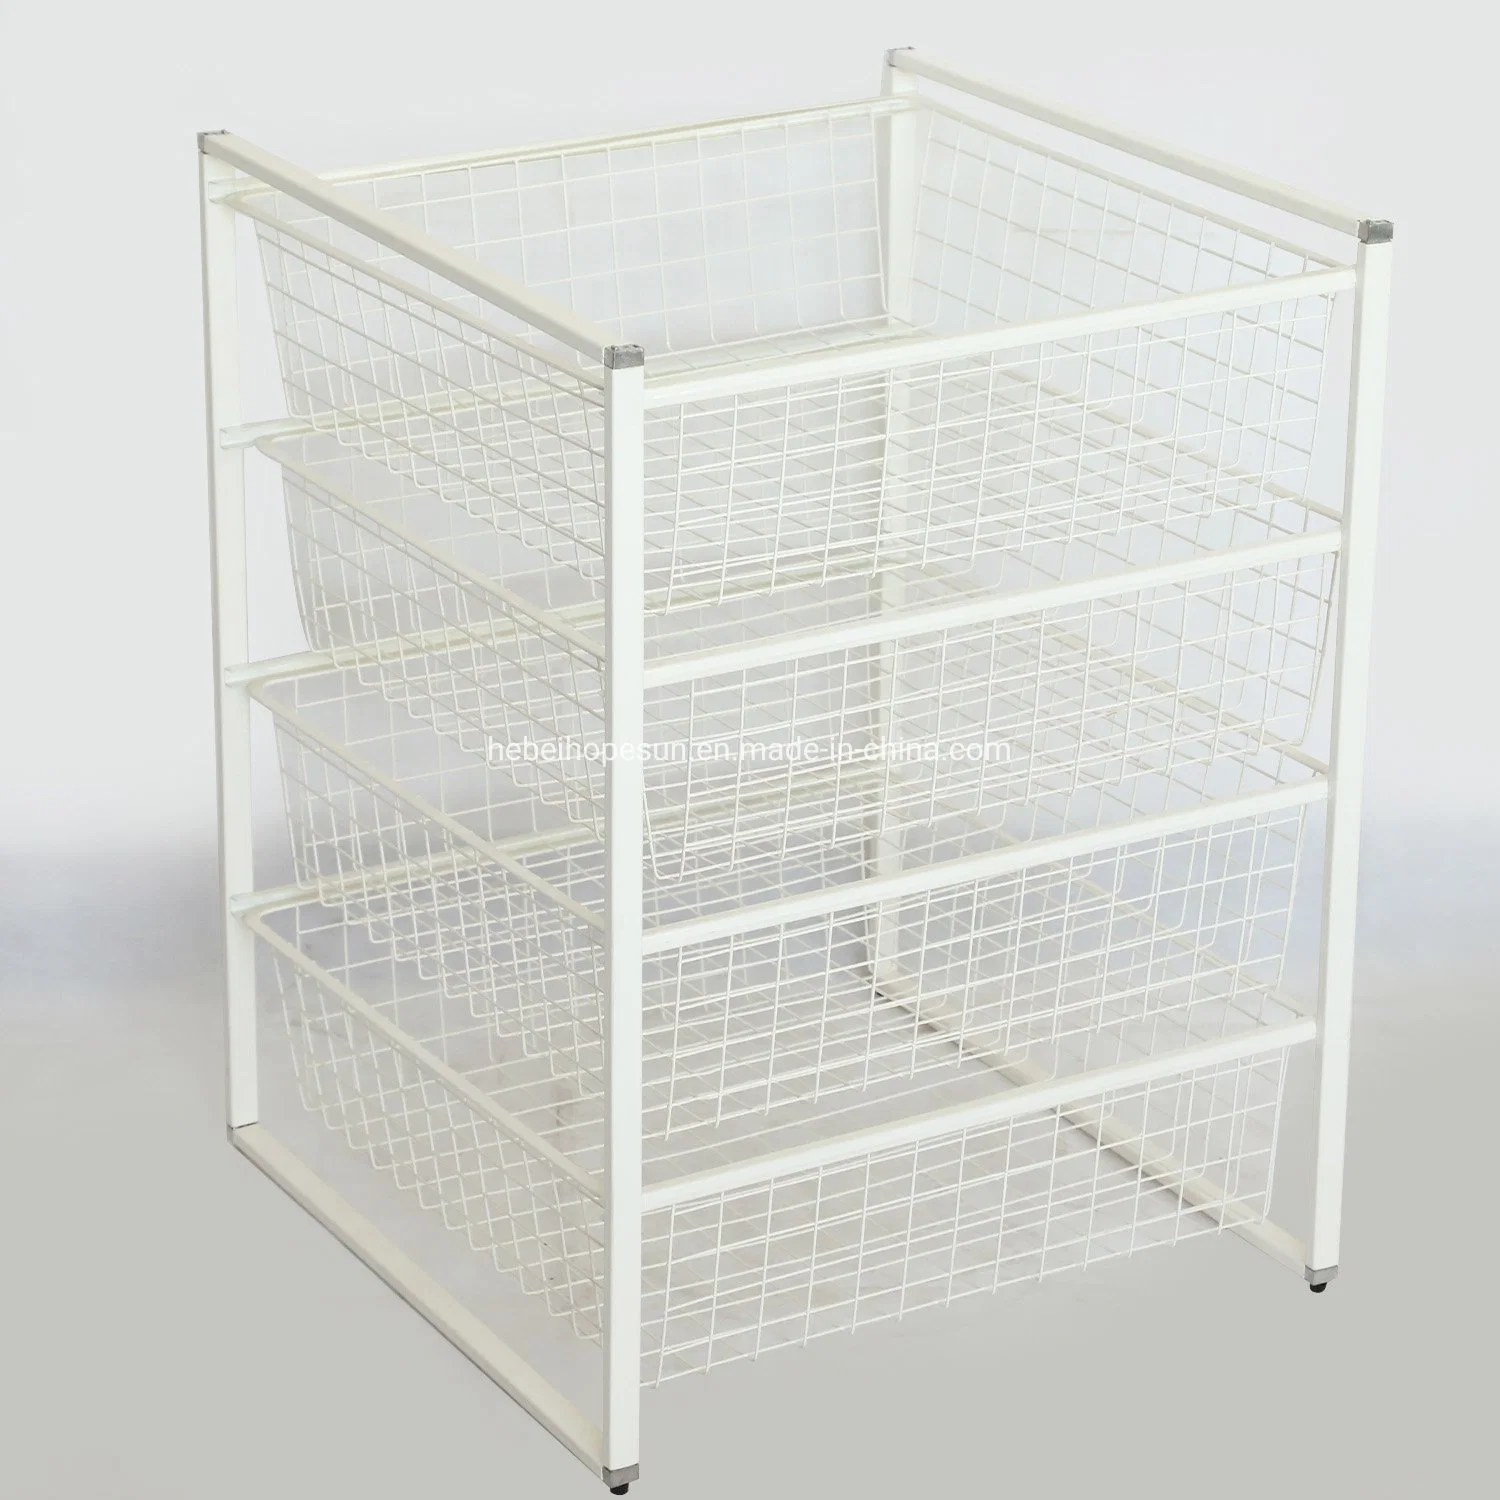 Steel Metal Wire Mesh Basket for Storage with White Color